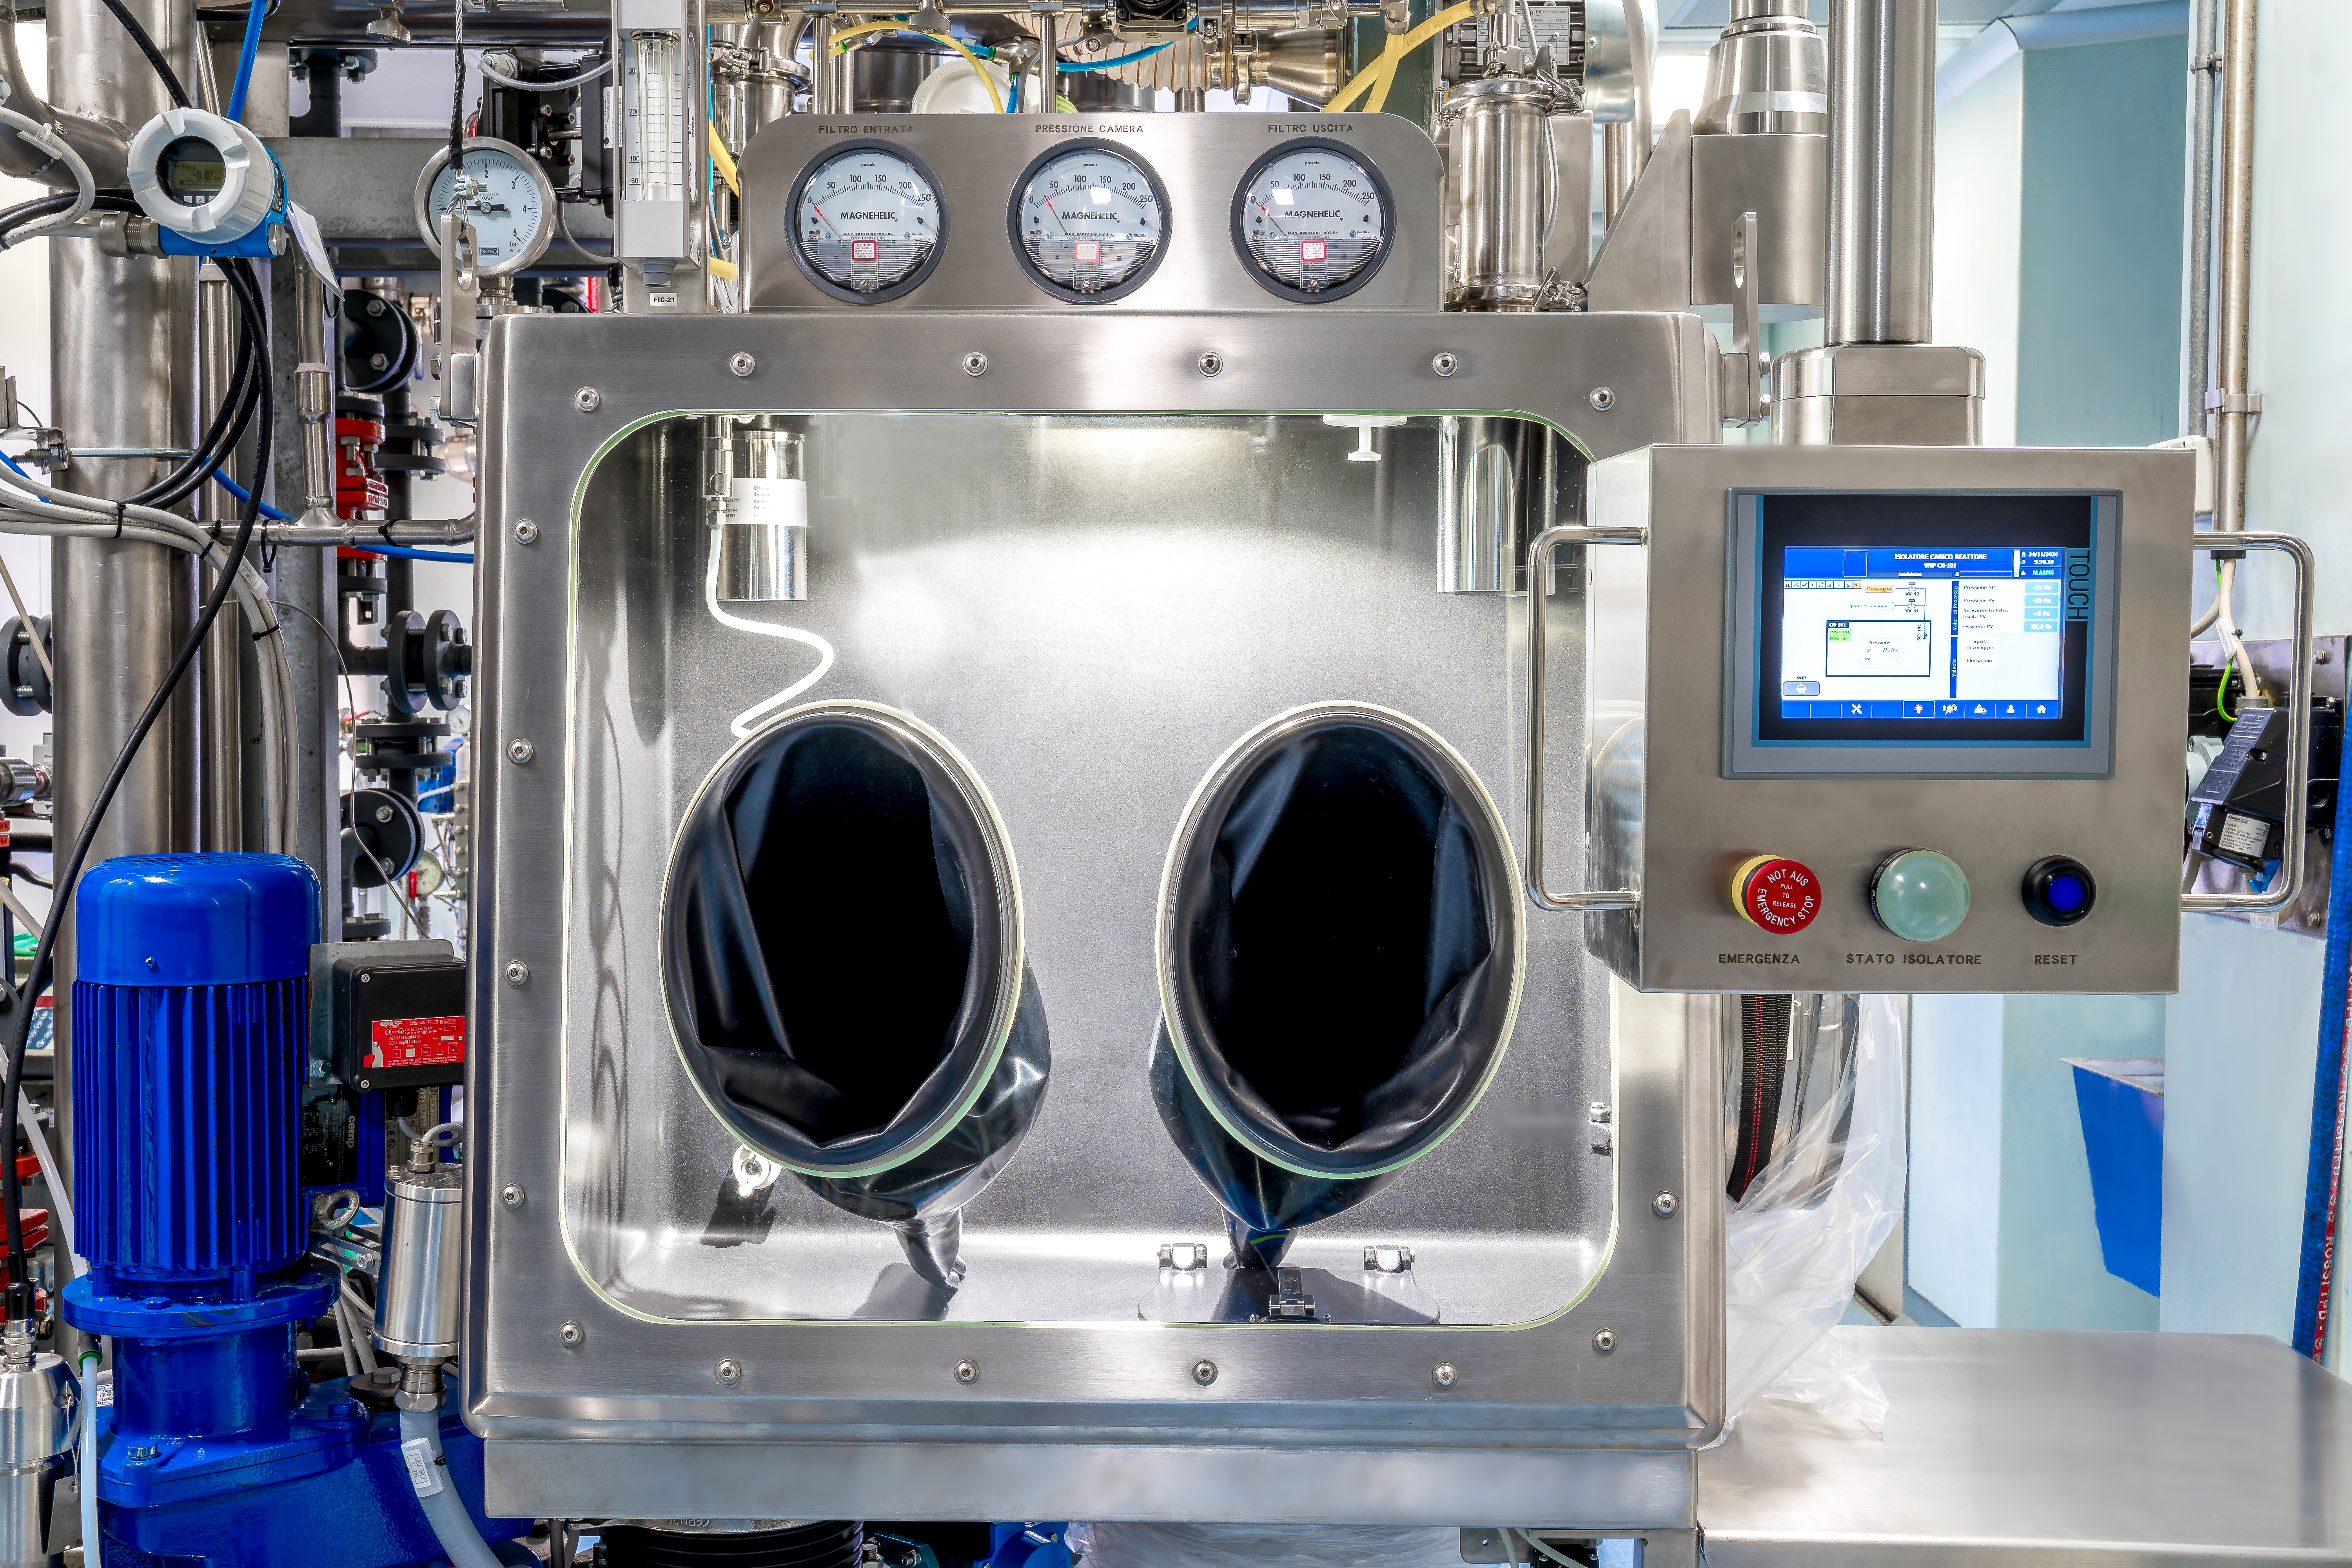 OLON ANNOUNCES A NEW HIGHLY POTENT API EXPANSION IN ITS RODANO SITE new, highly automated production line, multi-purpose and high containment,  suitable for the synthesis of highly active ingredients